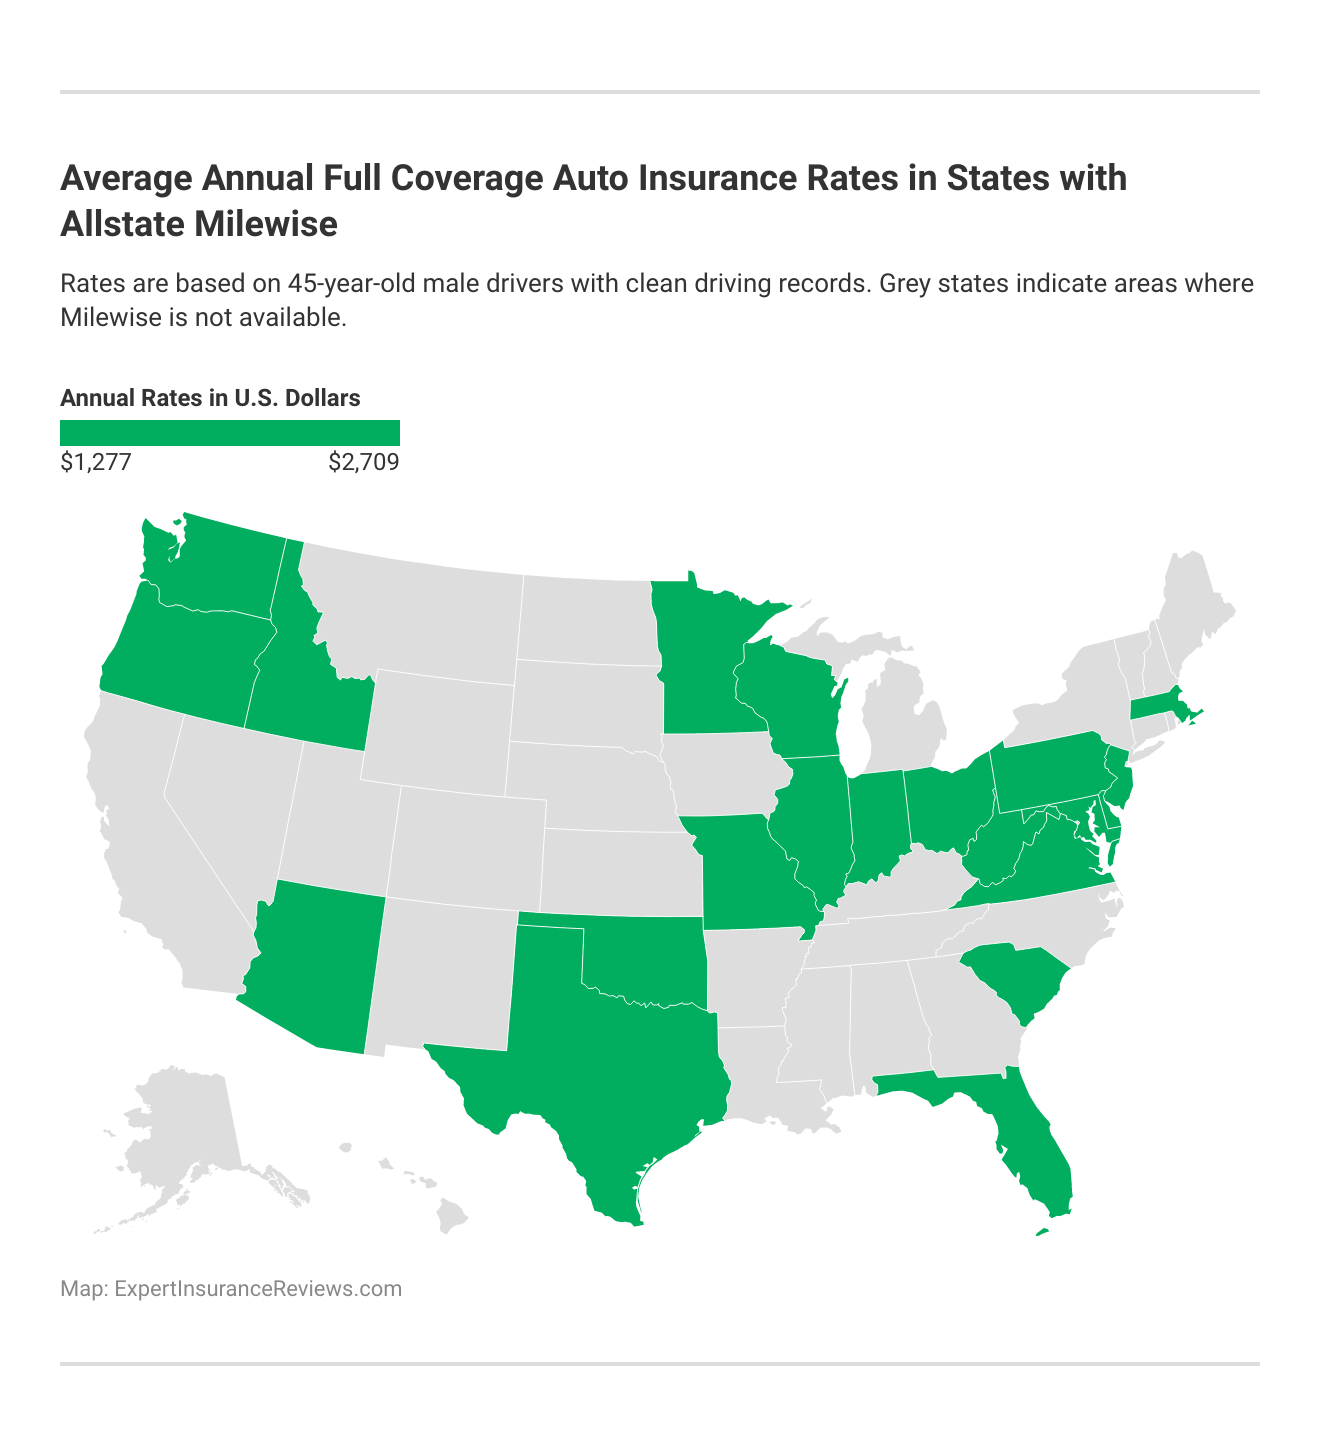 <b>Average Annual Full Coverage Auto Insurance Rates in States with Allstate Milewise</b>